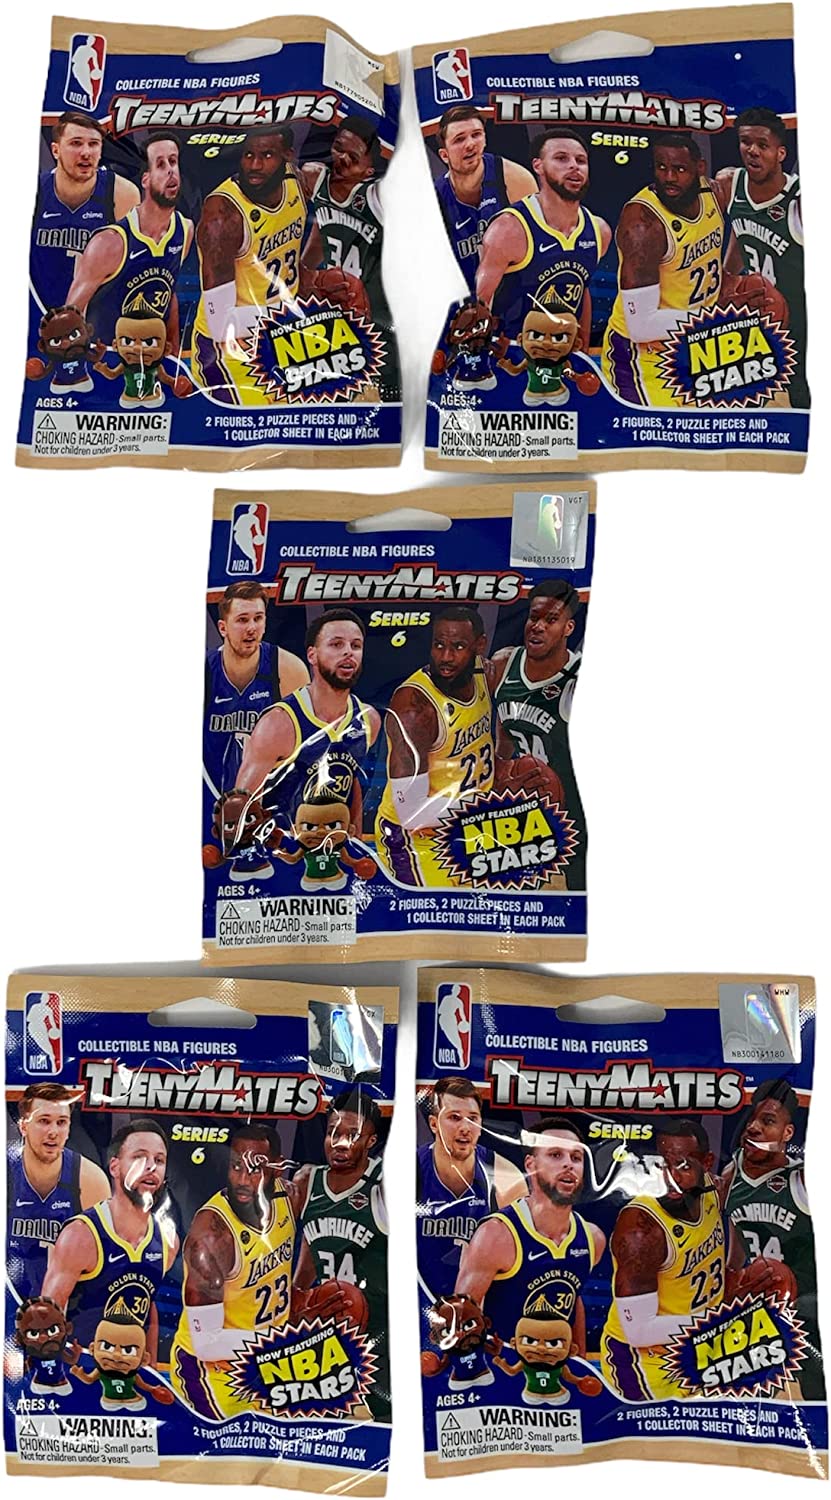 Teenymates Party Animal TeenyMates 2020 2021 NBA Series 6 Mini Figures Blind Bags Gift Set Party Bundle 5 Pack Multicolored